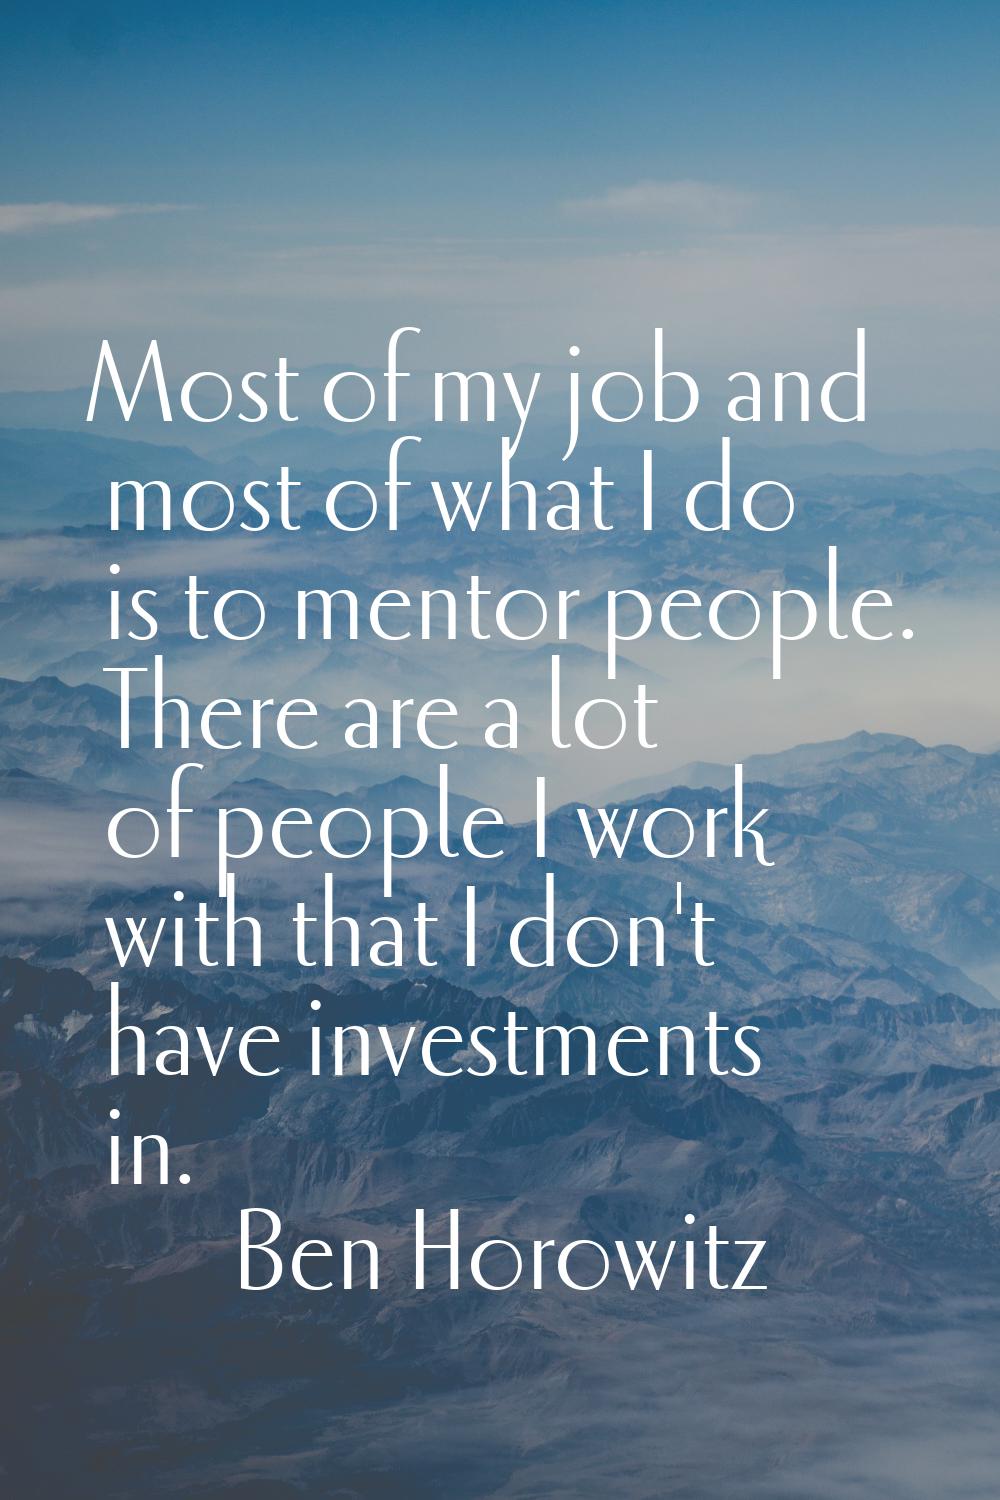 Most of my job and most of what I do is to mentor people. There are a lot of people I work with tha